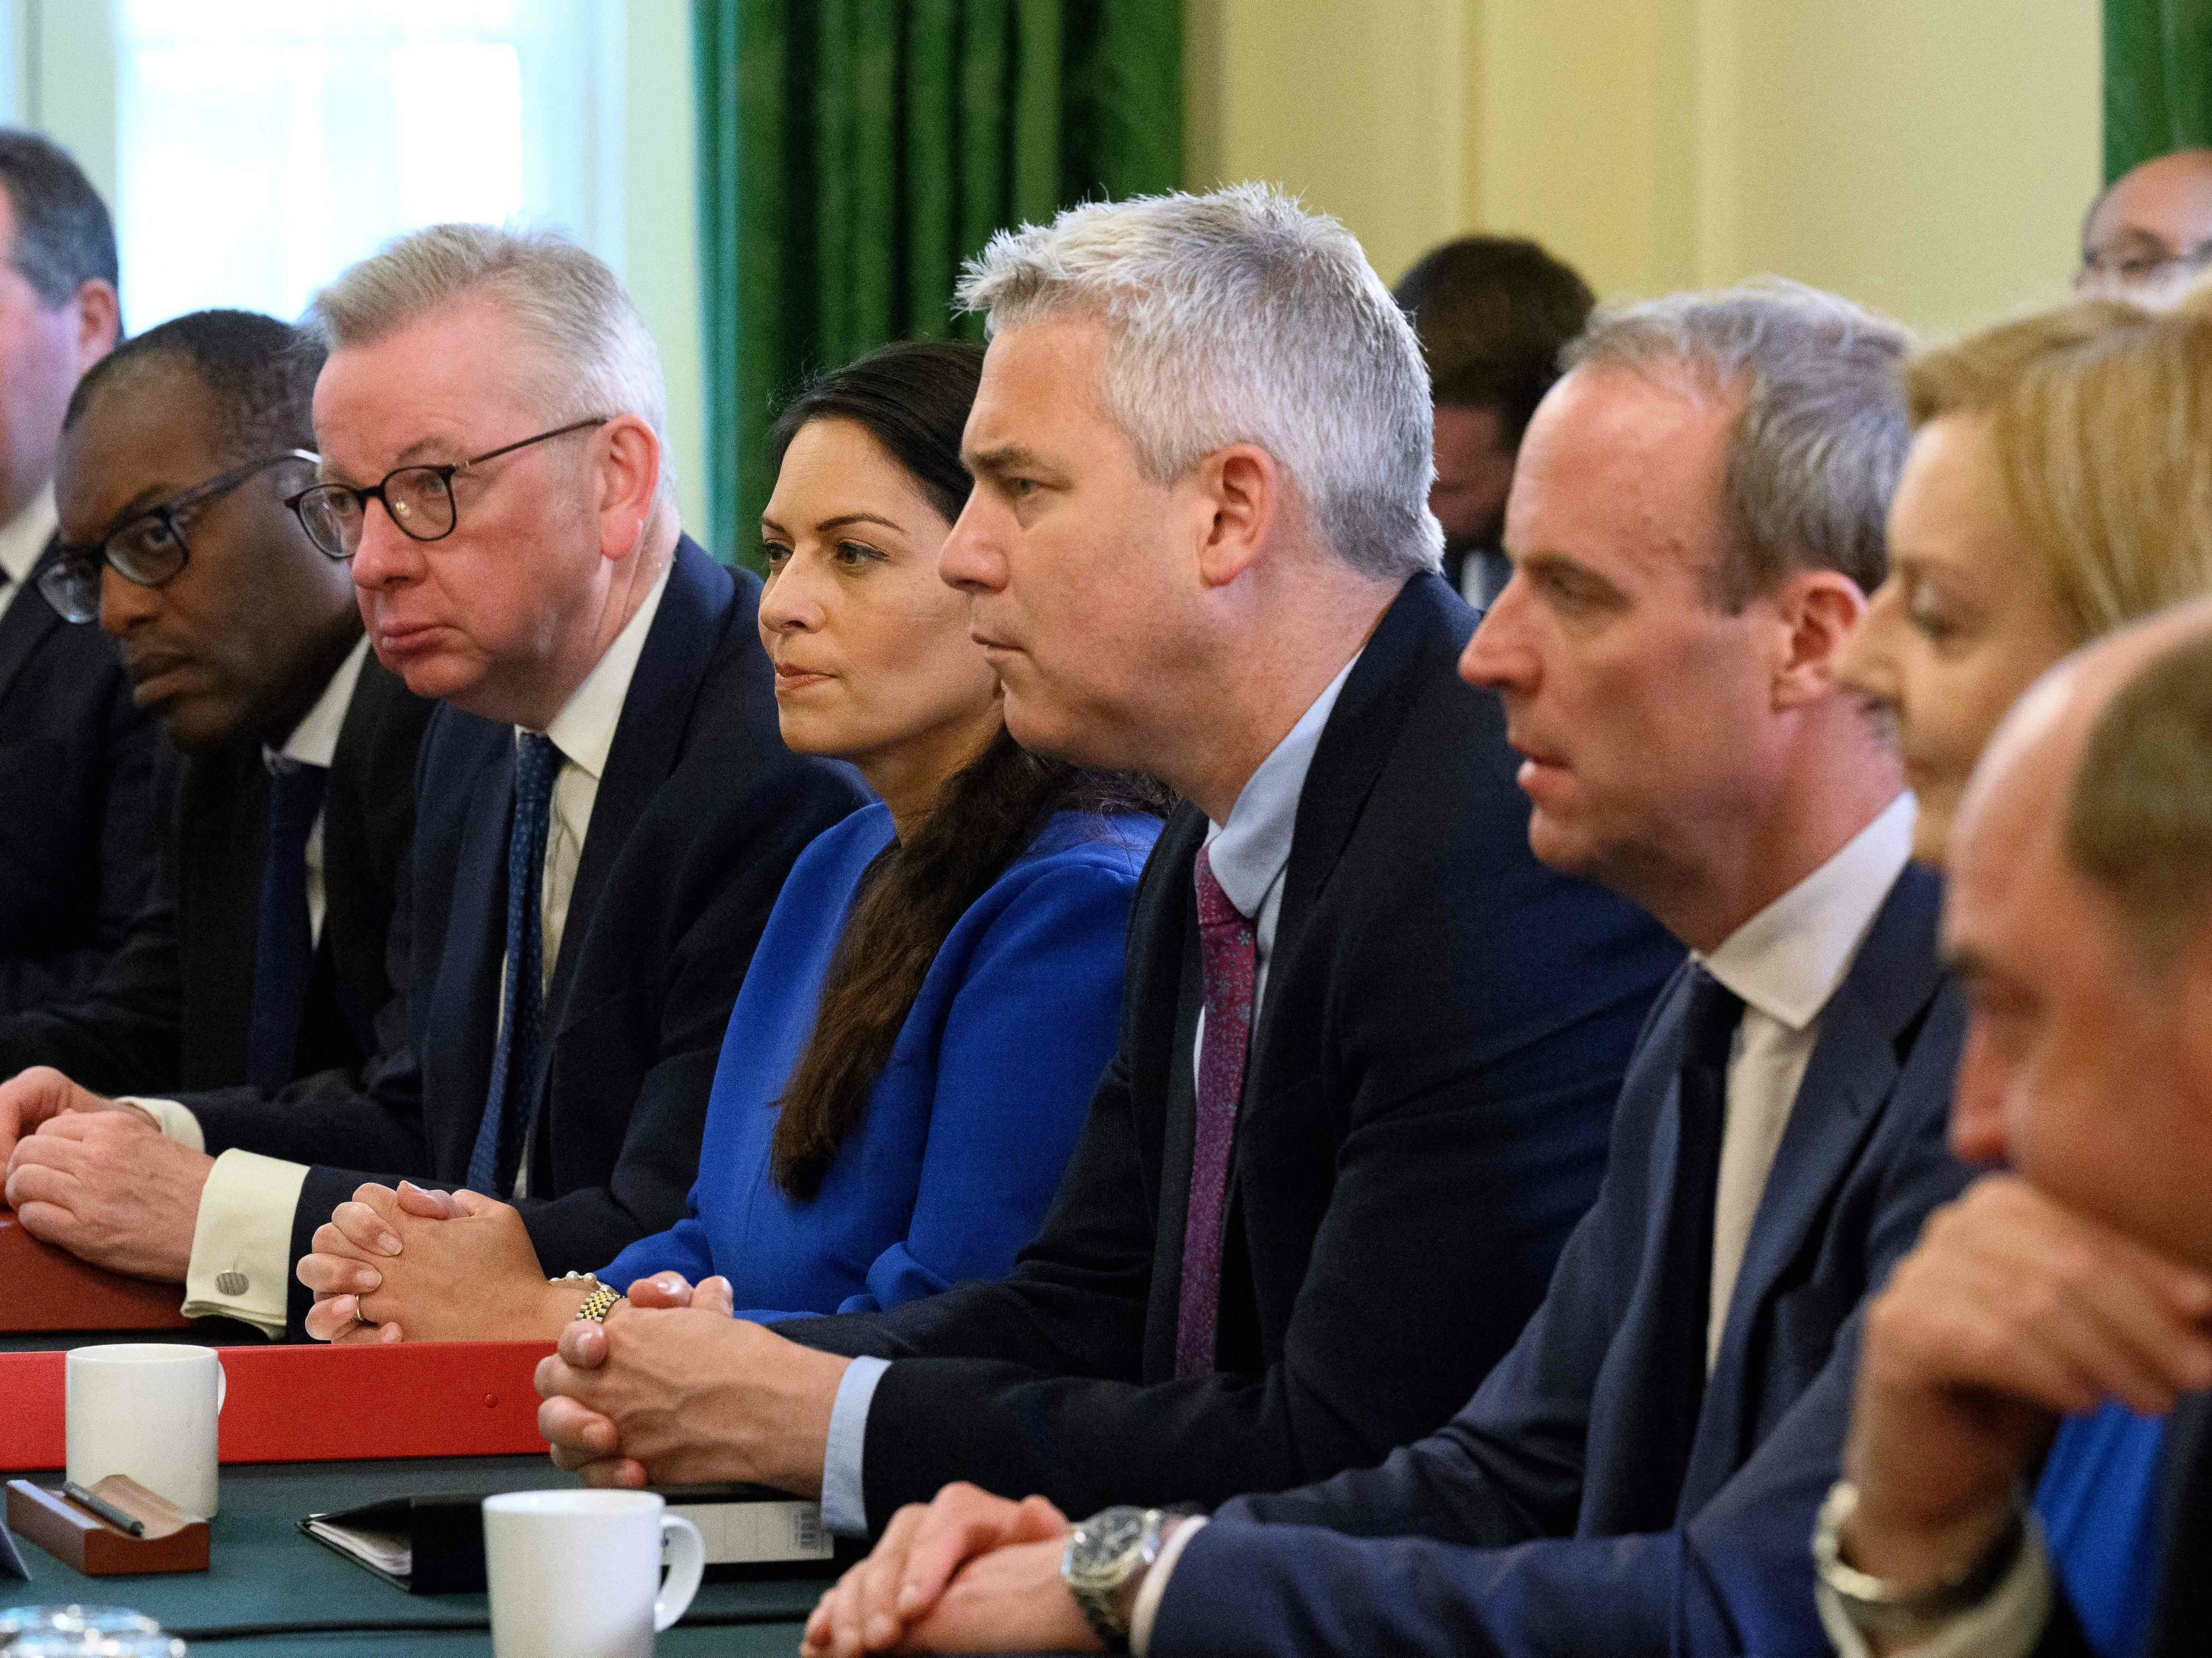 Kwasi Kwarteng, Priti Patel, and Dominic Raab have all missed committee meetings since Boris Johnson’s resignation, with Michael Gove suggesting some areas of the government are ‘not functioning’